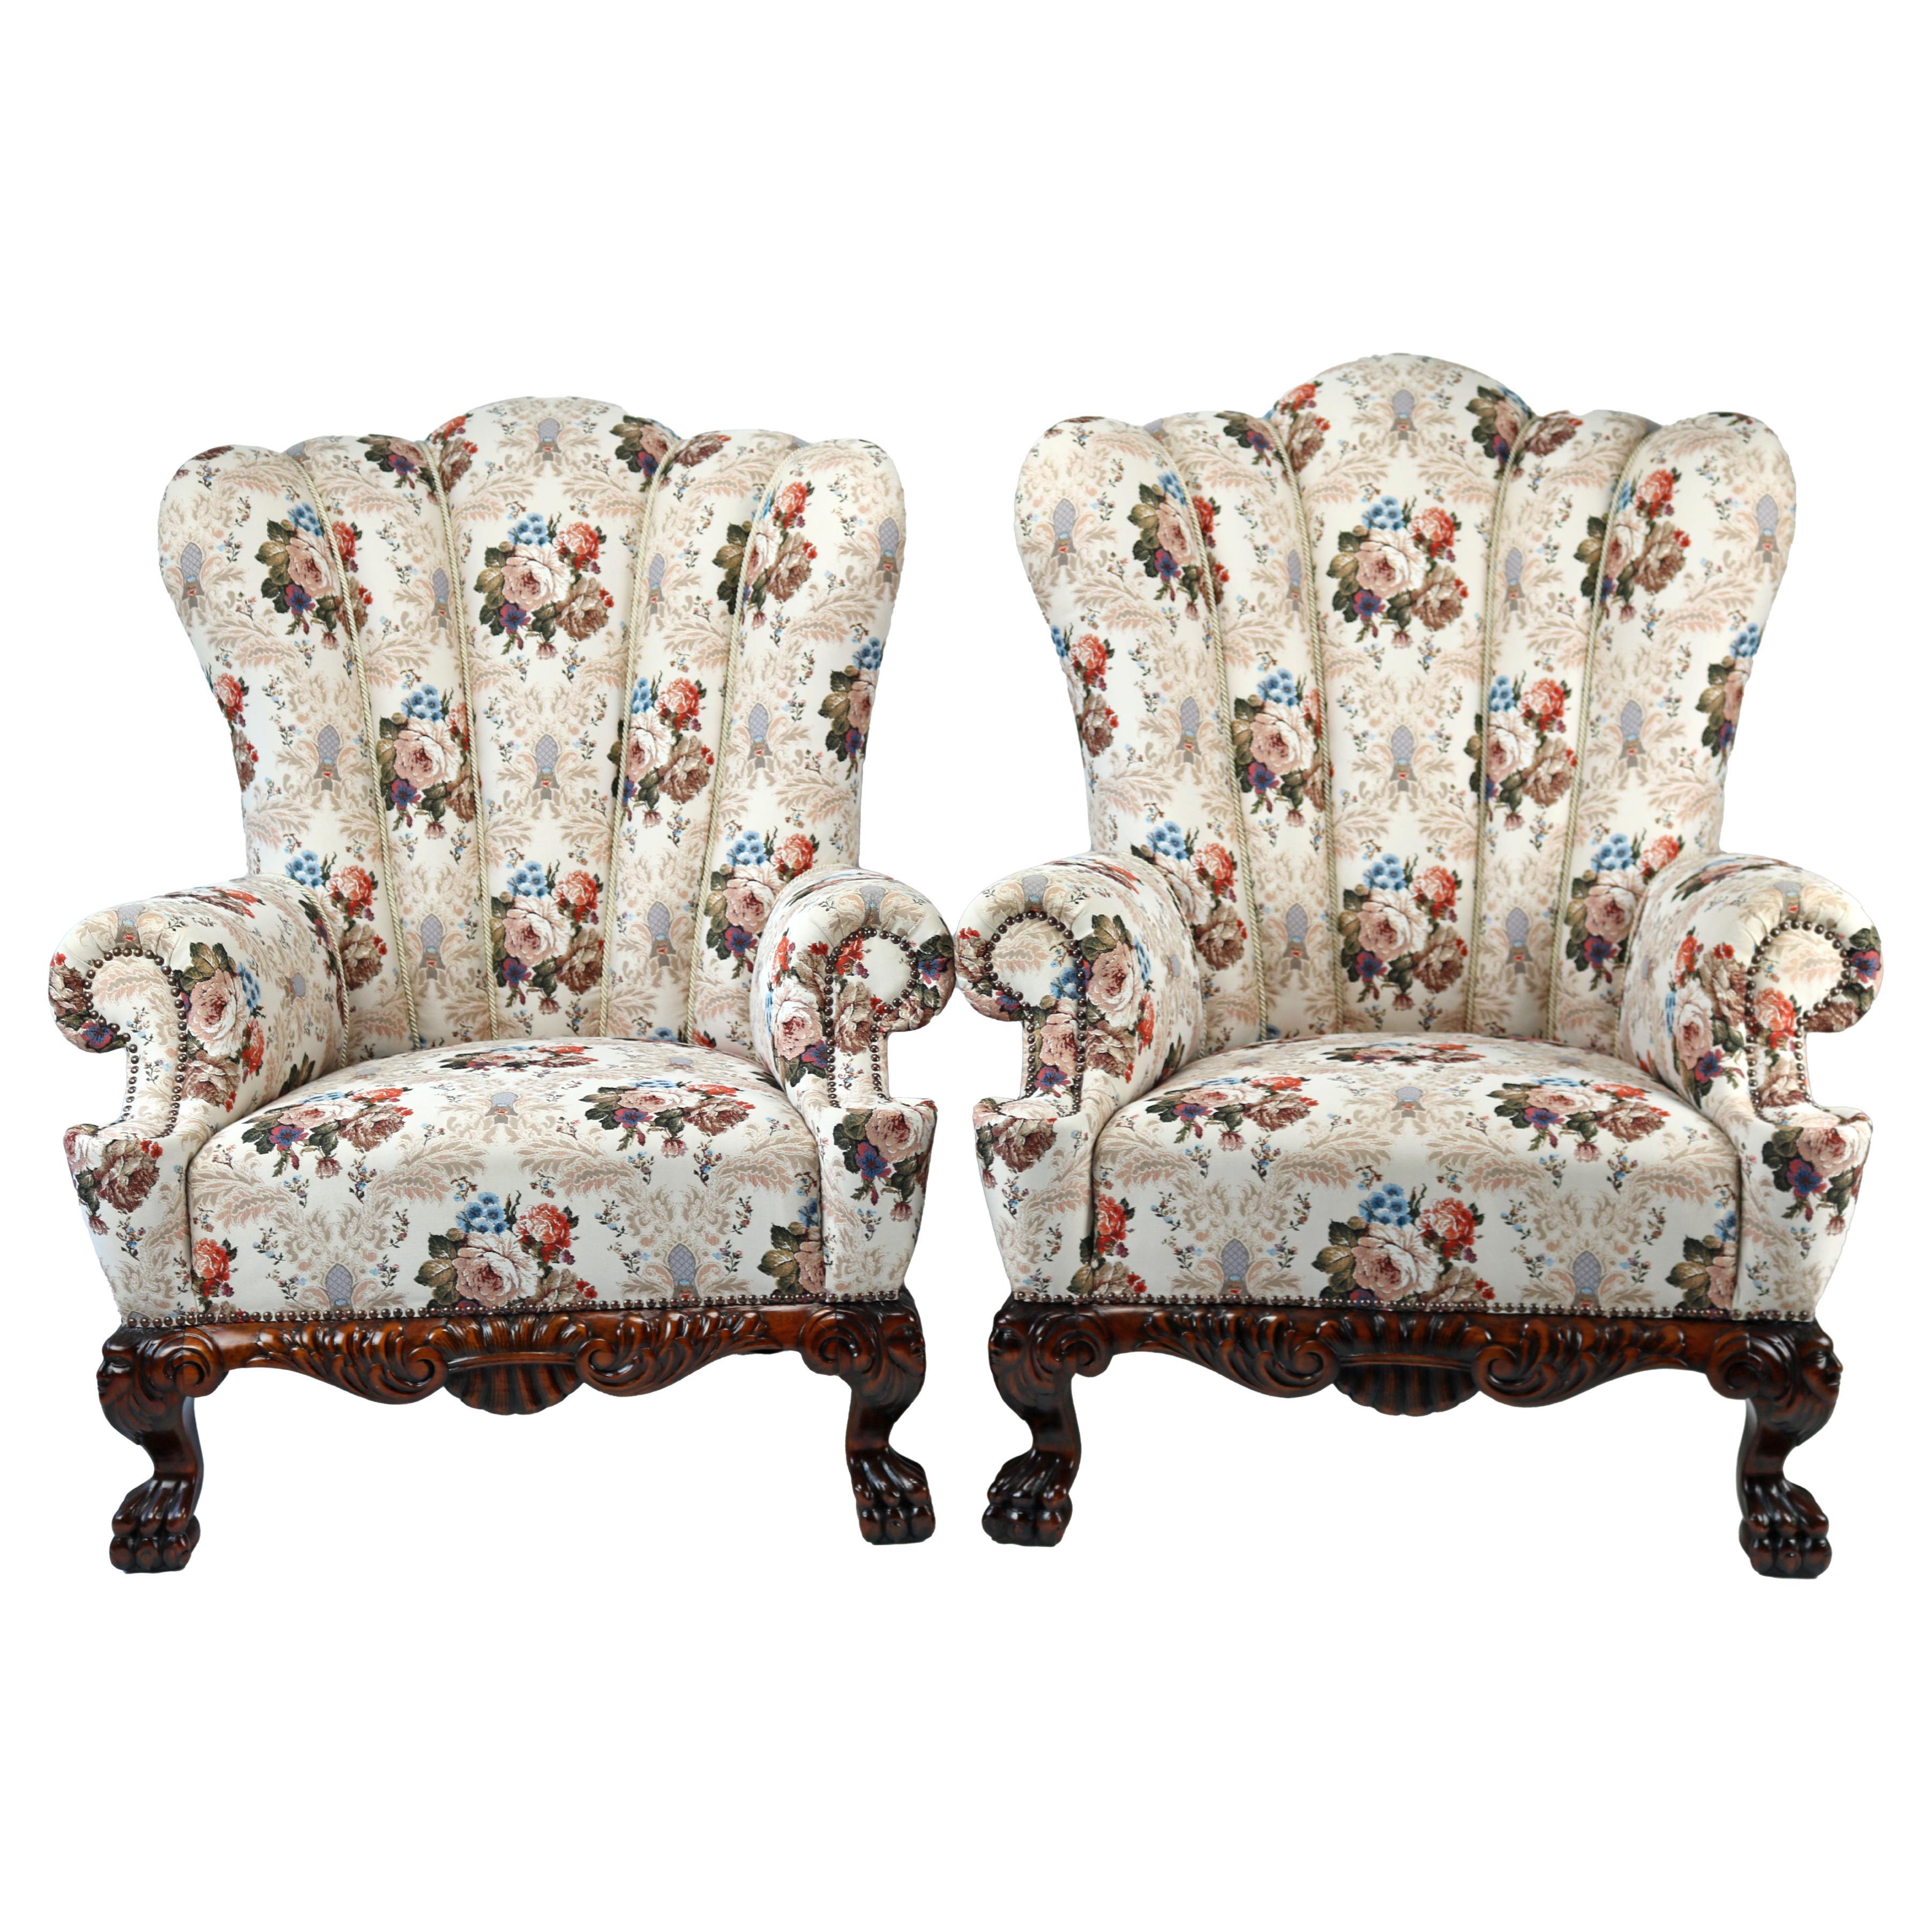 Pair of 19th century Austro-Hungarian wingback chairs reupholstered 